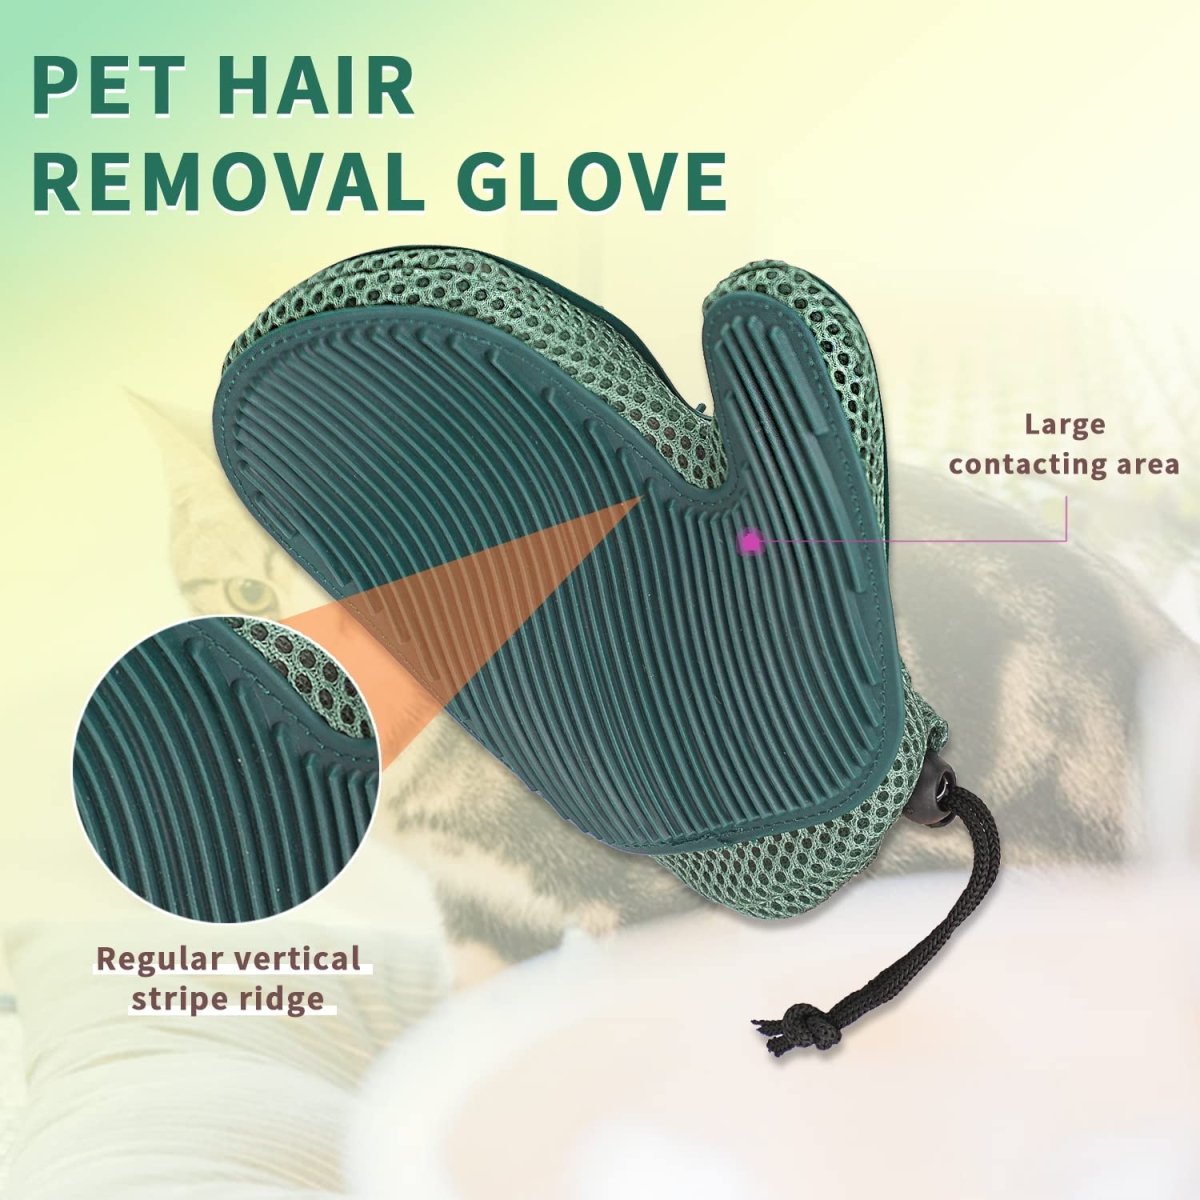 Cat Hair Glove & Pet Fur Remover Glove, Dog Grooming Glove Brush for Shedding,Pet Hair Remover Mitt for Cleaner, grooming glove - YourCatNeeds